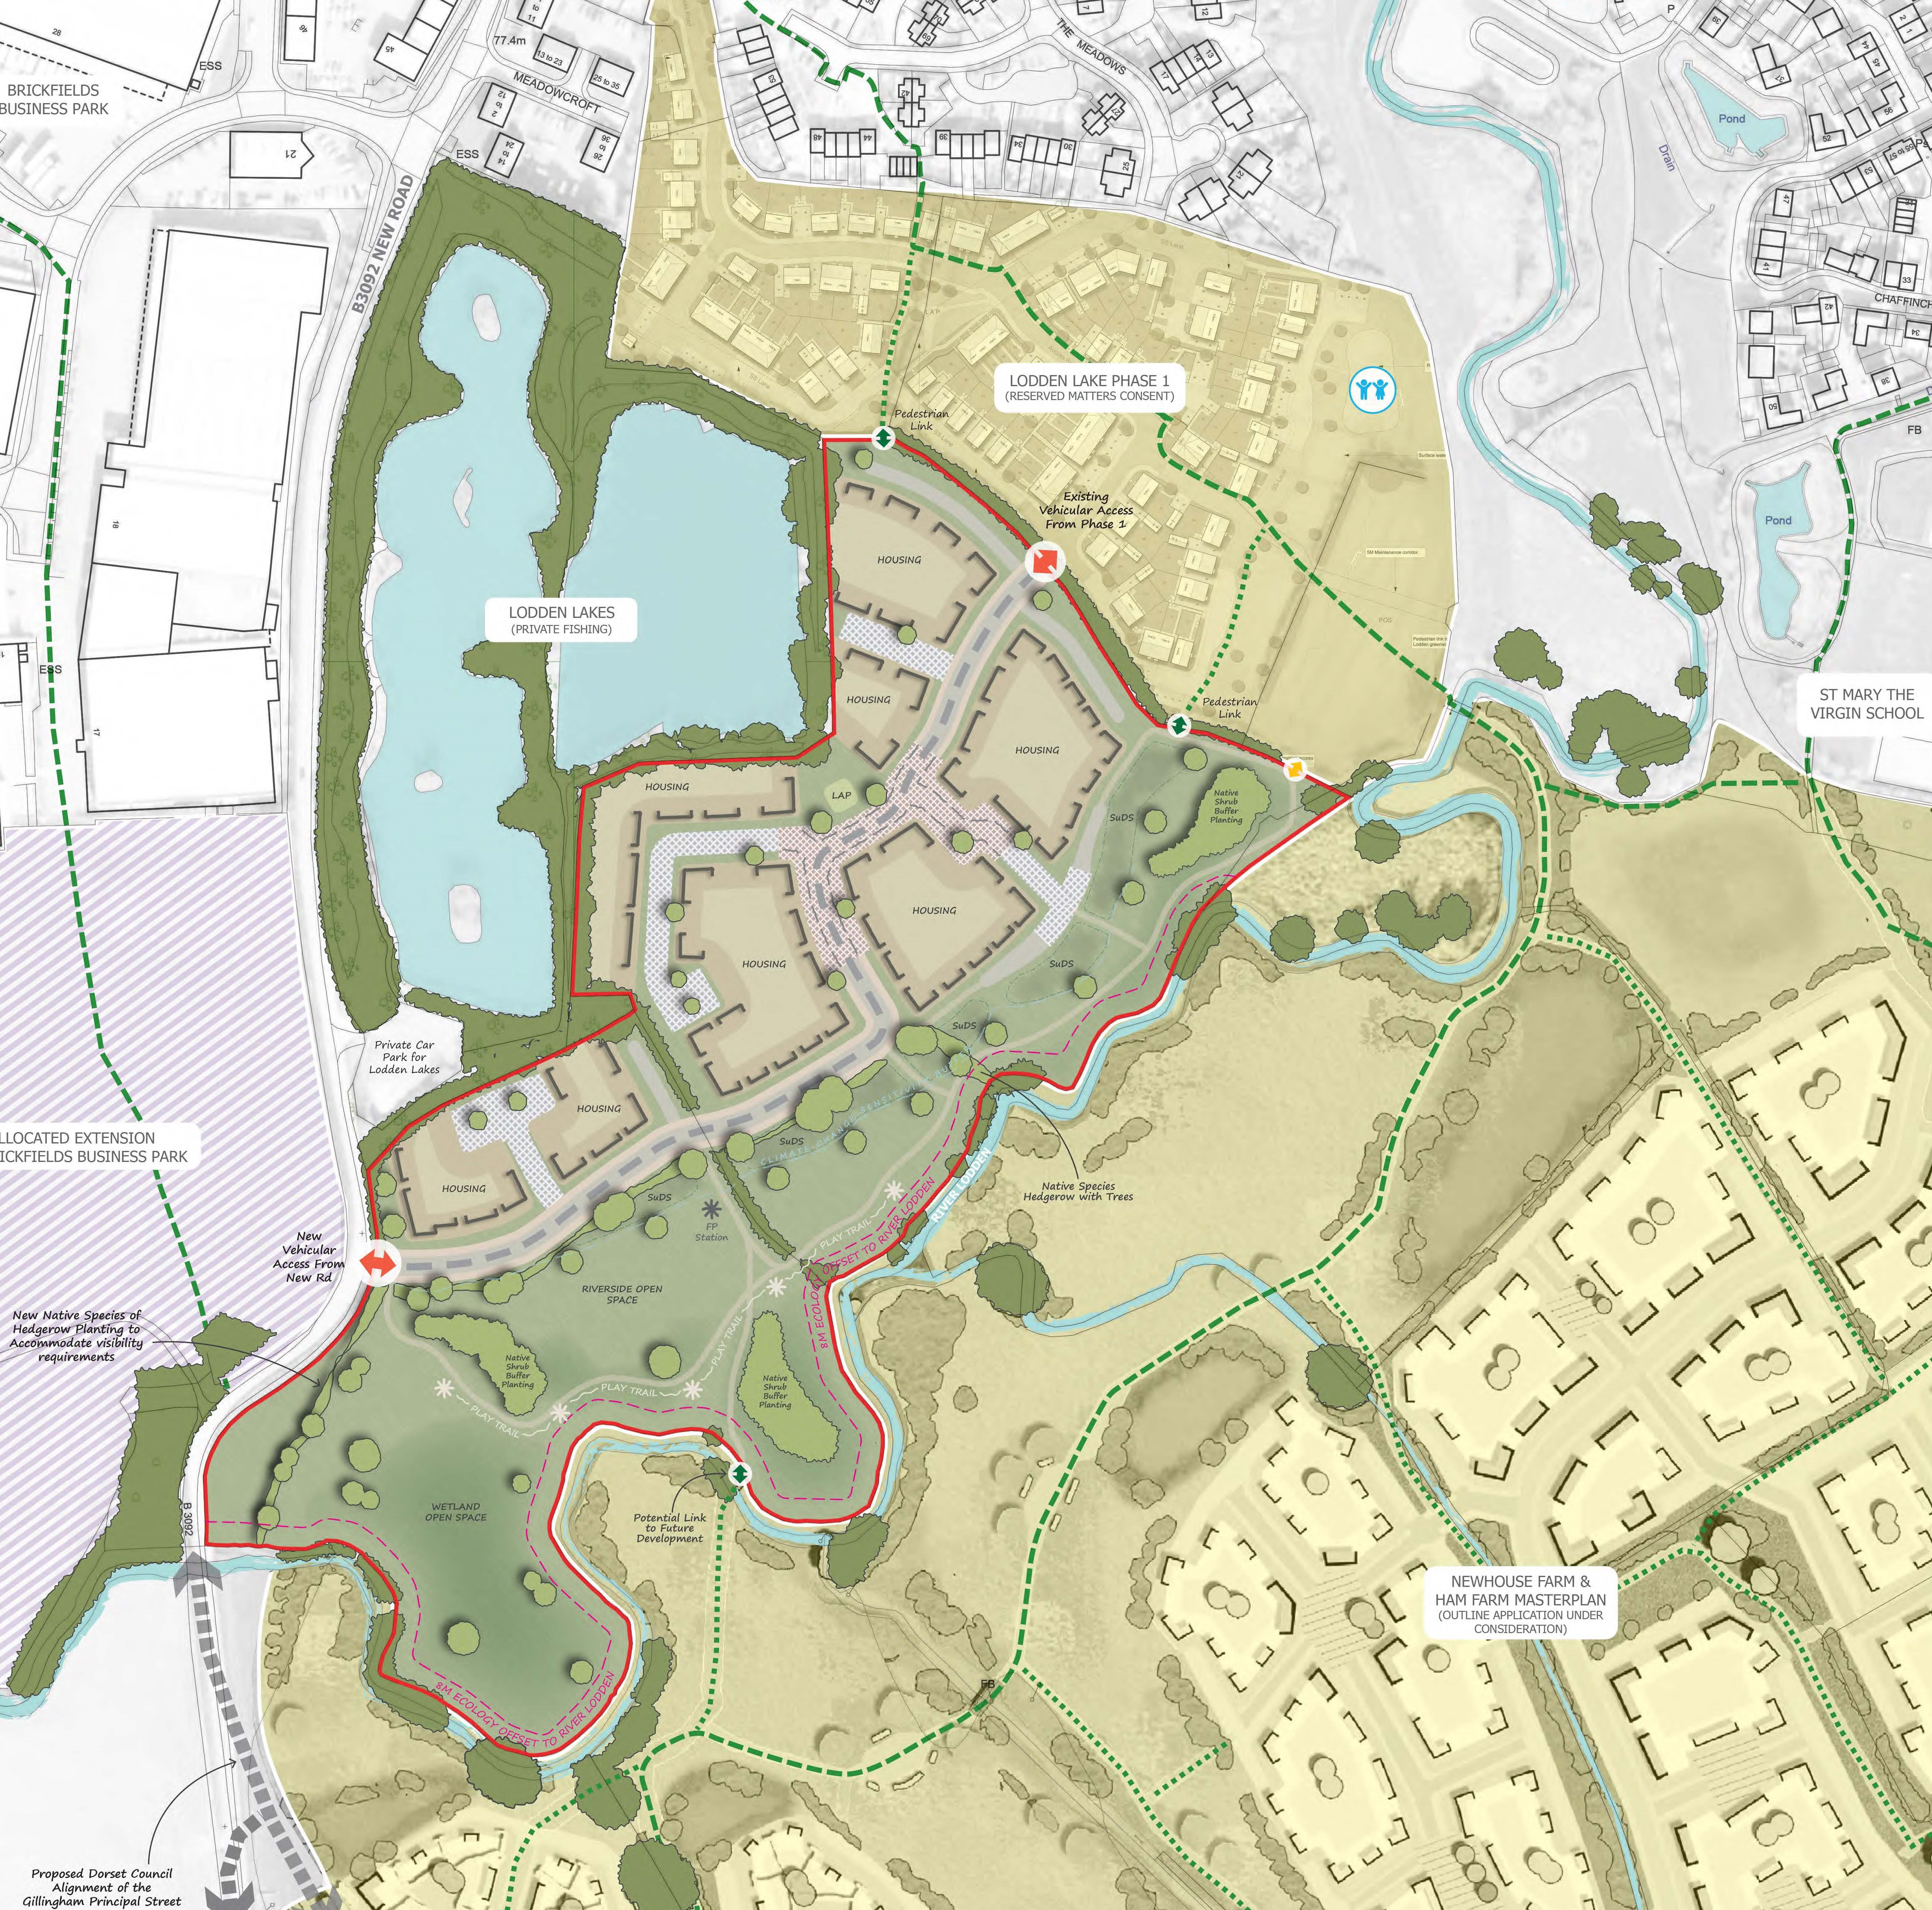 Successful planning application – Lodden Lakes phase 2